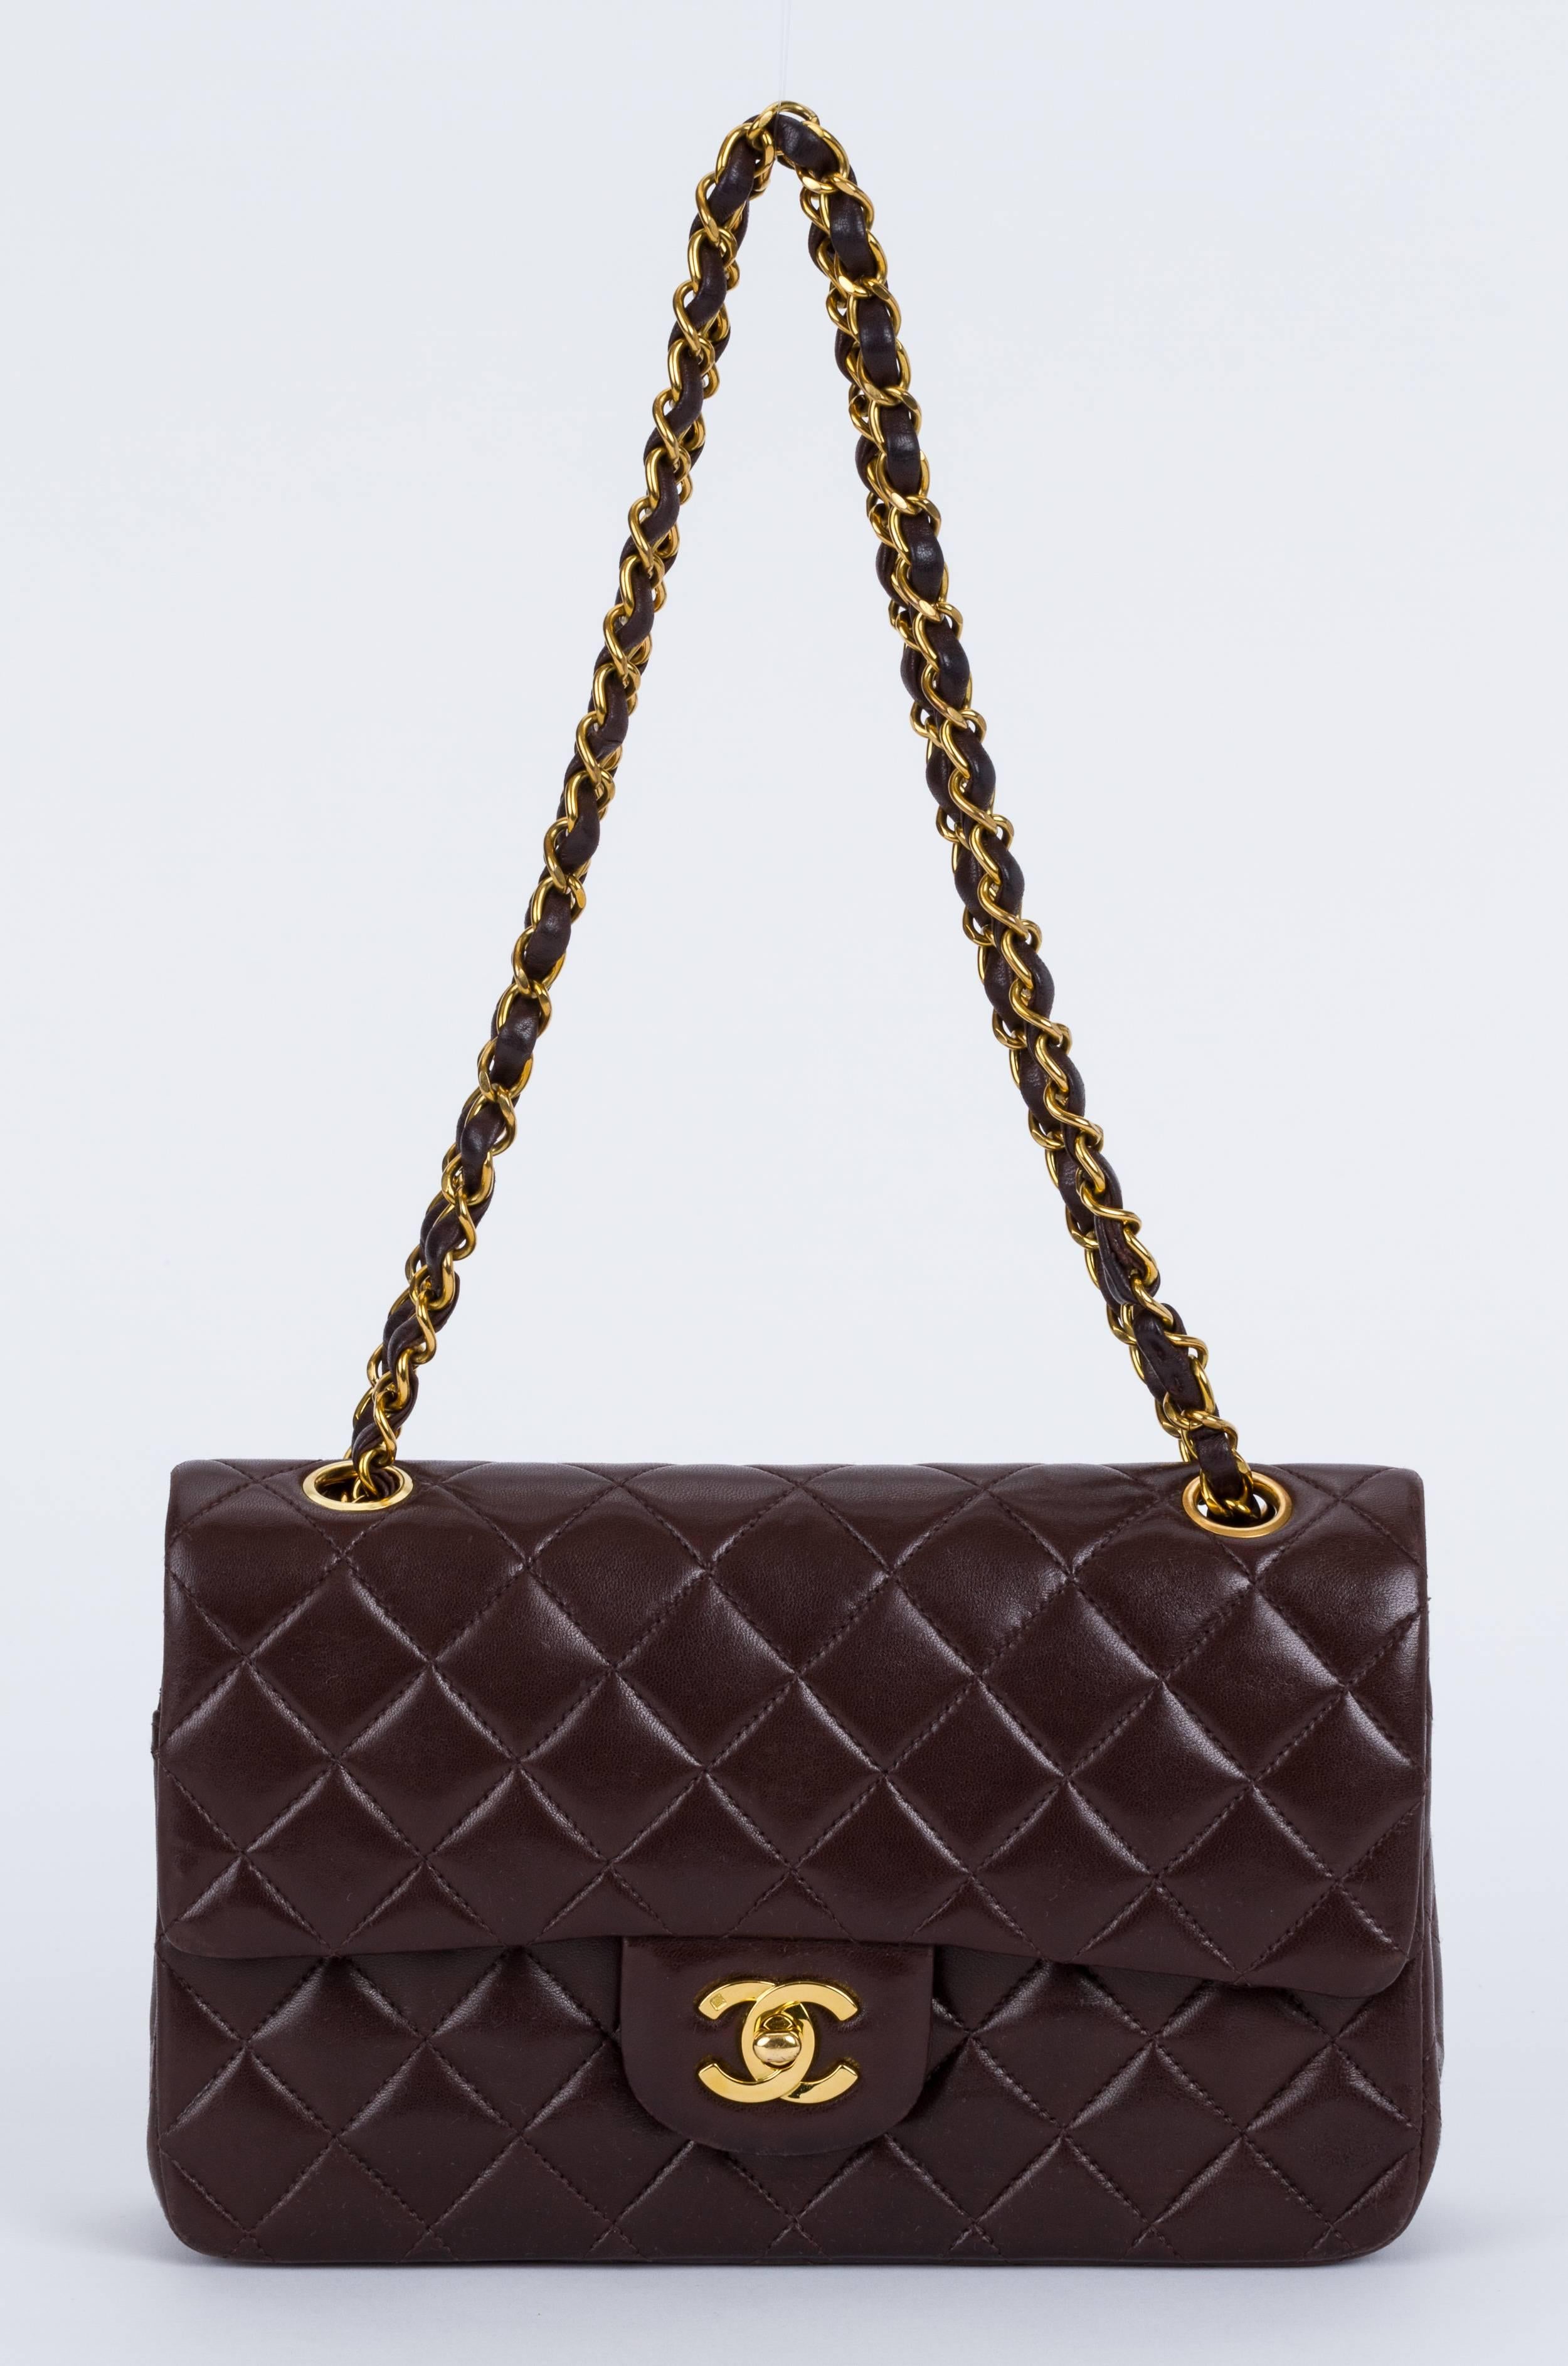 Chanel brown classic double flap lambskin 2.55 bag. Can be worn two ways: shoulder drop, 17.5